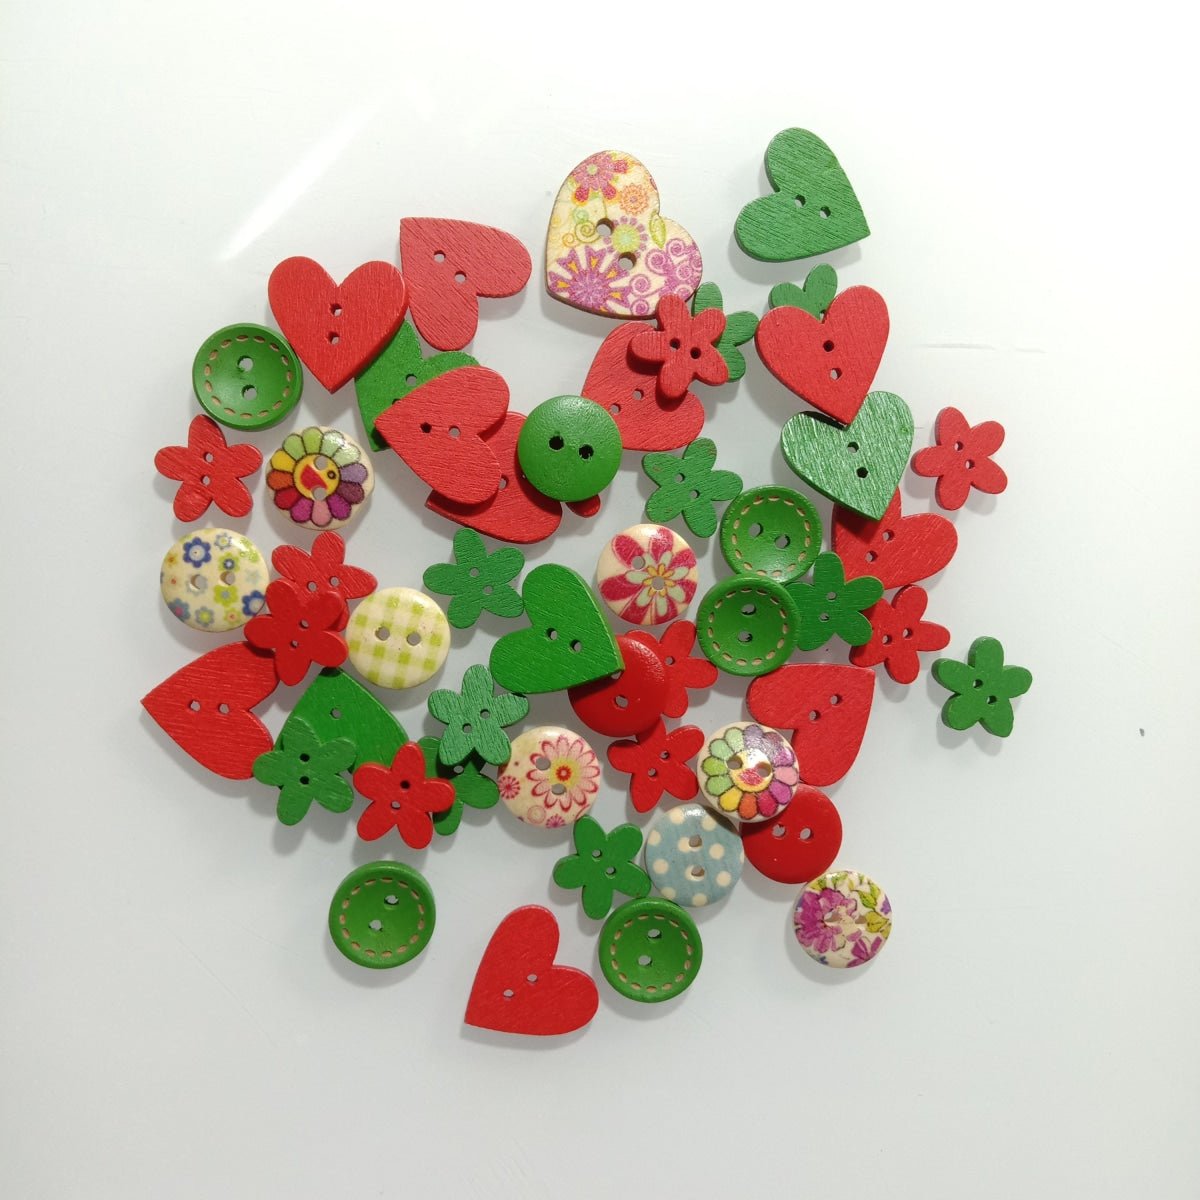 50pcs 10-20mm Colourful Red Green Flower Heart Wooden Buttons Christmas Theme 2 Hole Sewing Scrapbooking Craft DIY - Asia Sell